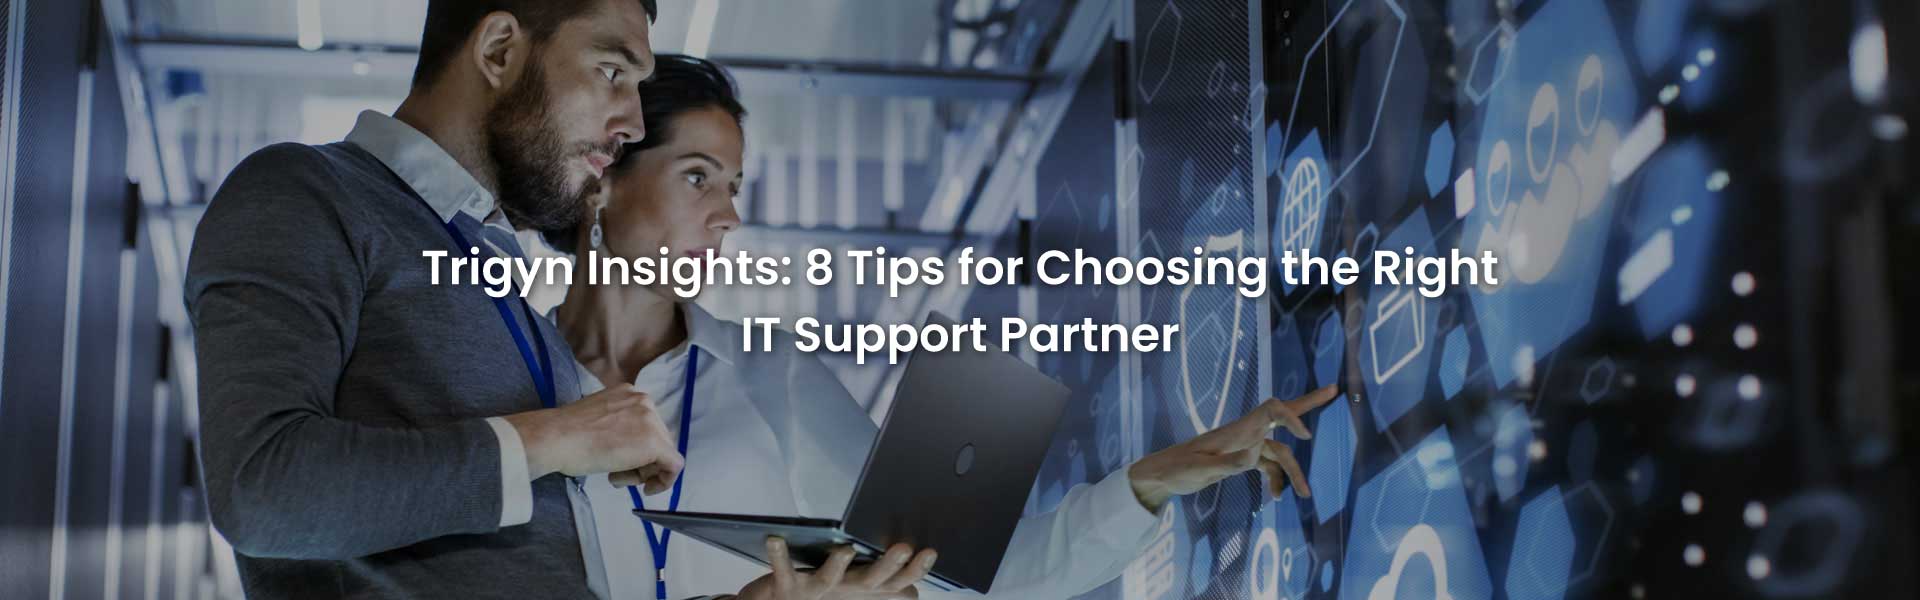 8 Tips for Choosing the Right IT Support Partner